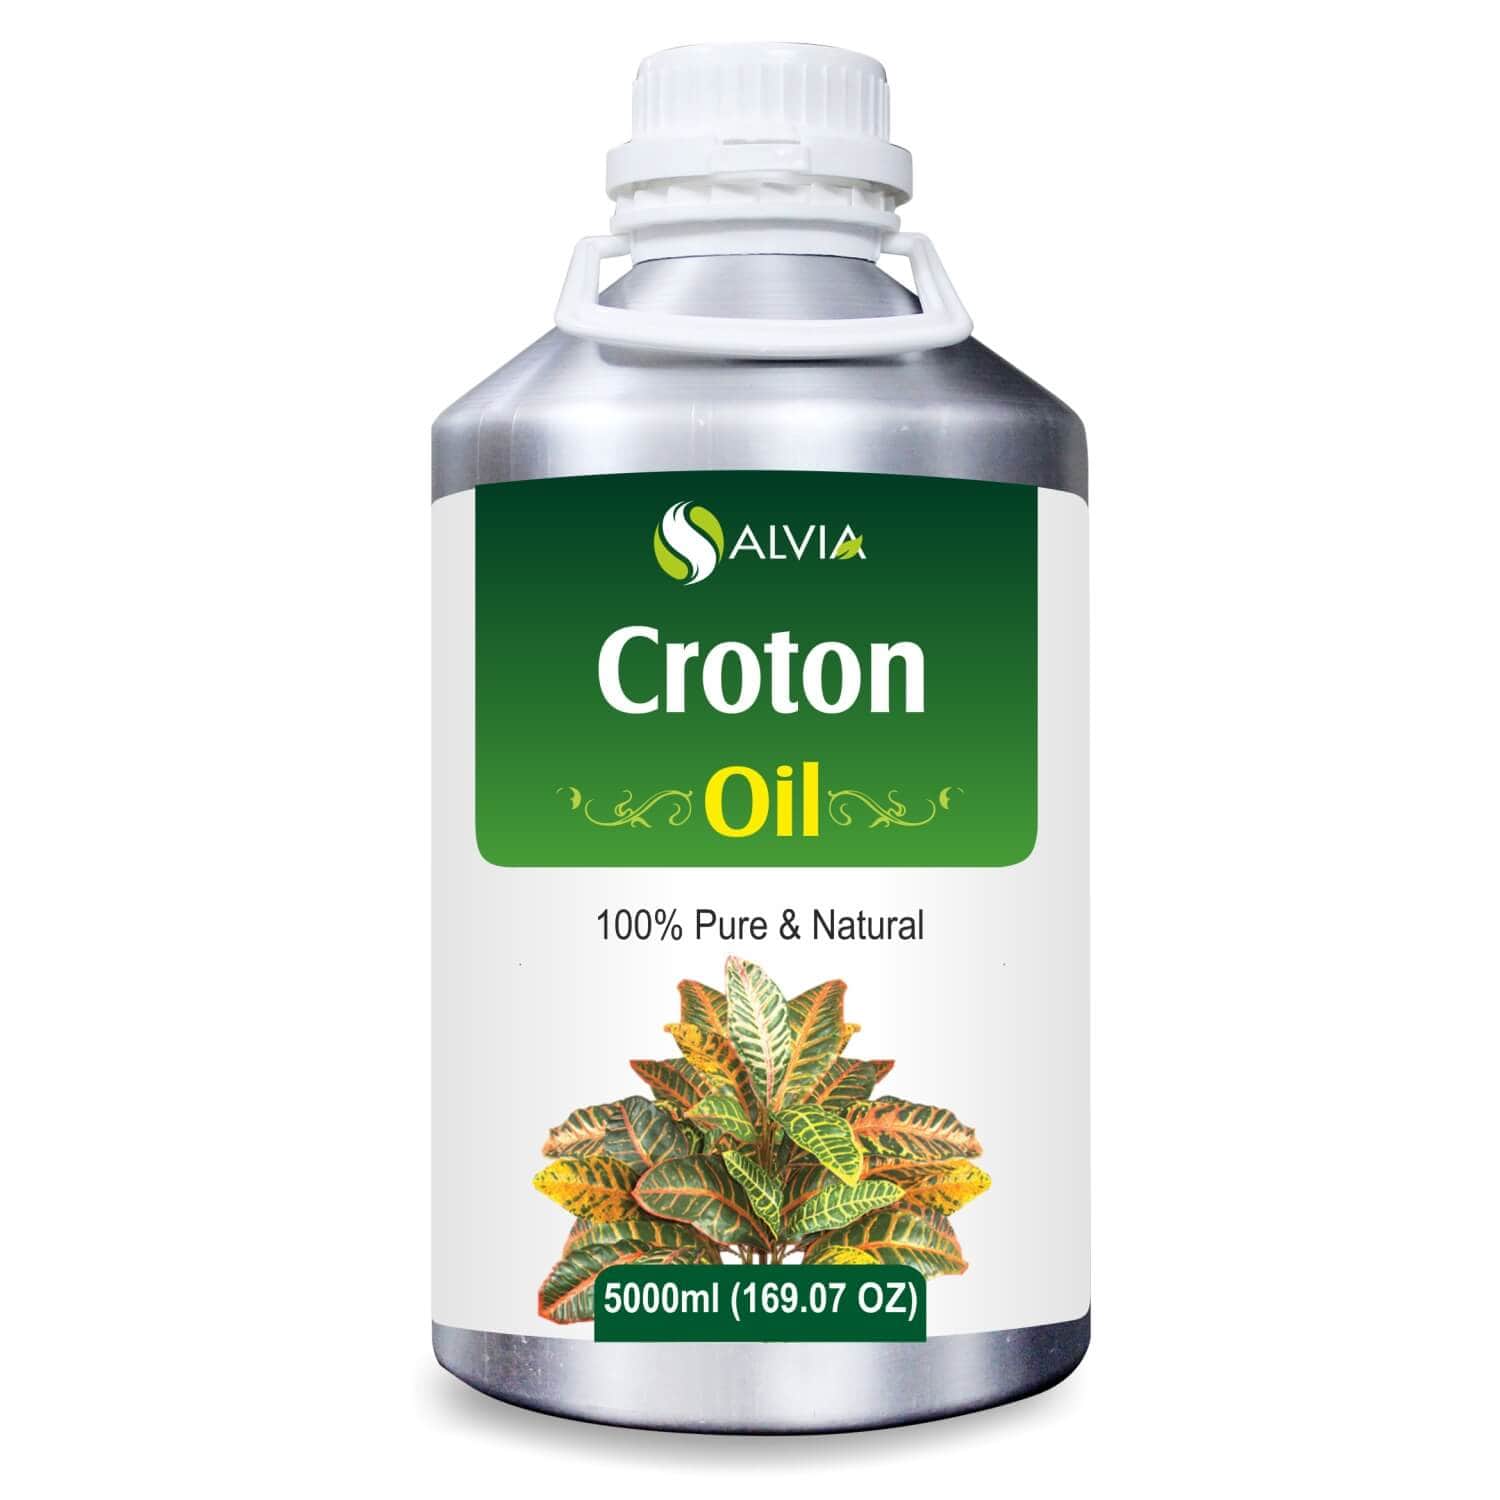 Salvia Natural Essential Oils 5000ml Croton Oil (Codiaeum variegatum) 100% Natural Pure Essential Oil Exfoliates Skin, Reduces Fine Lines, Wrinkles And Scars, Relieves Joint Pain